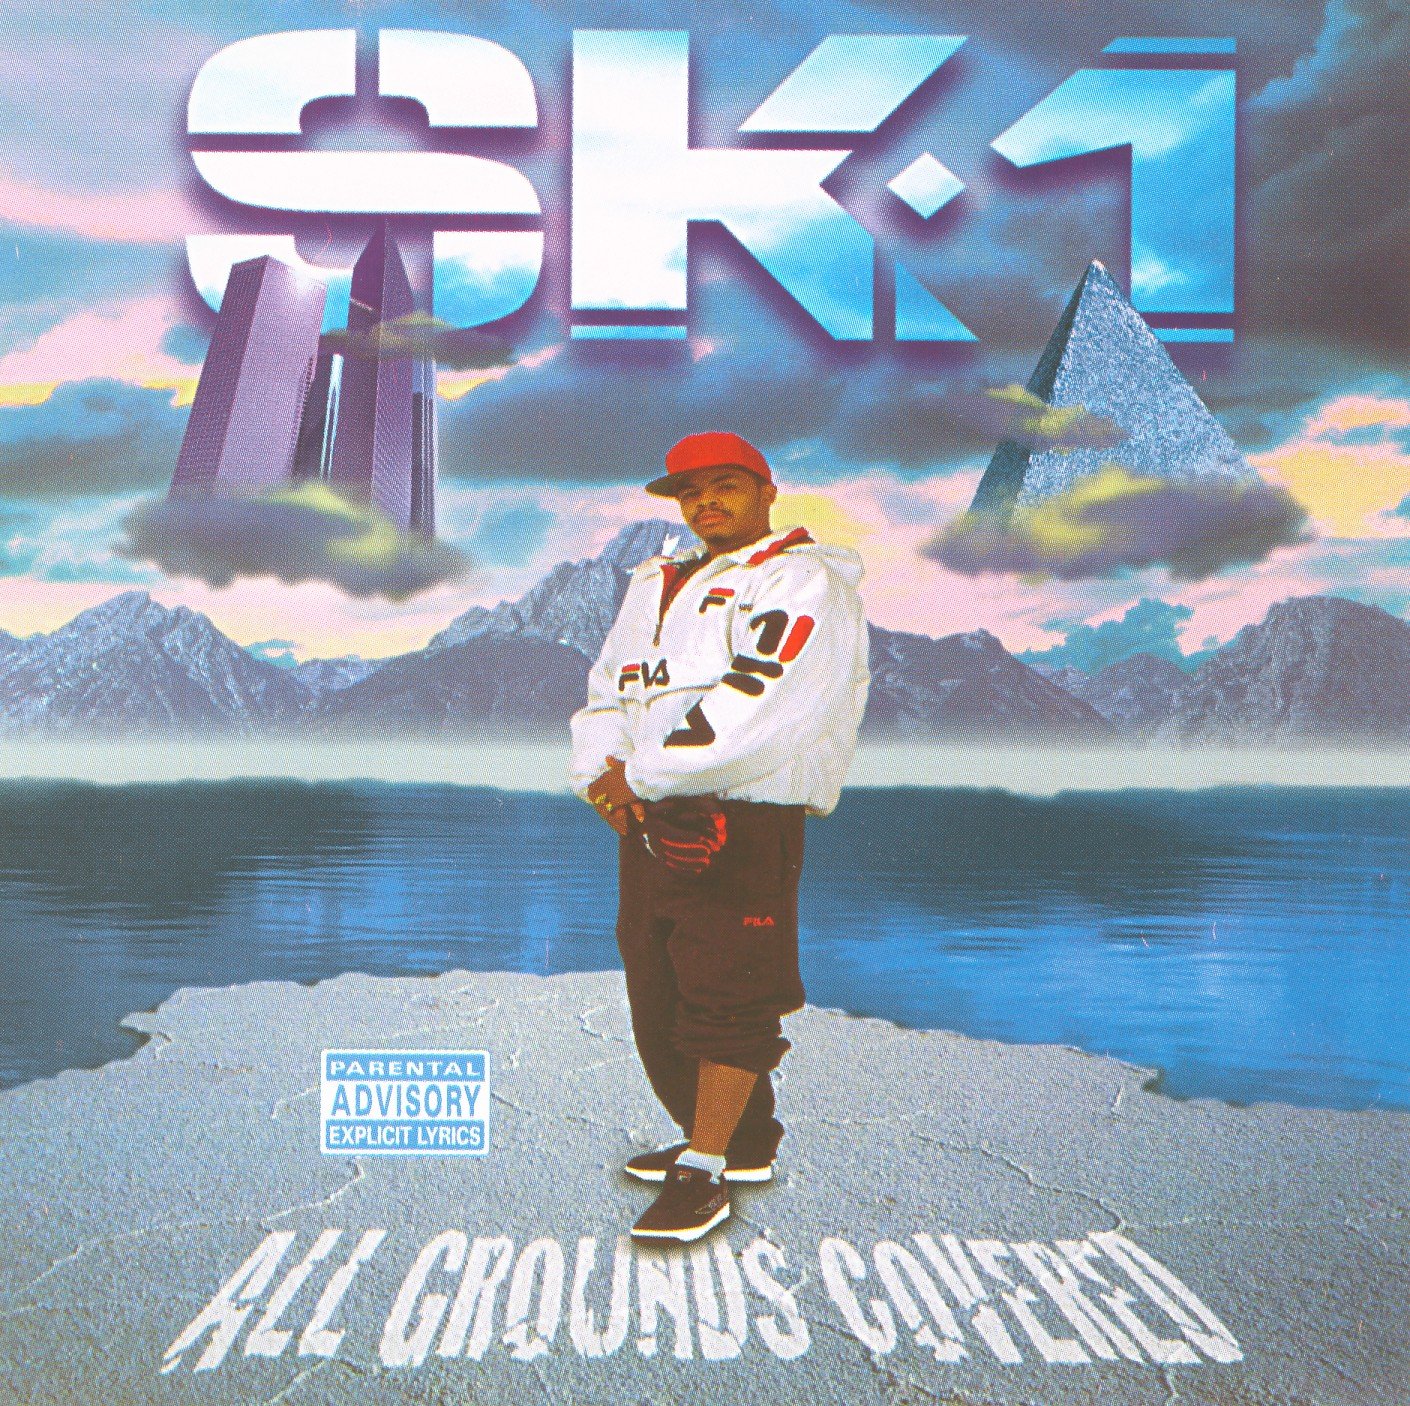 SK-1 - All Grounds Covered (1996) FLAC Download